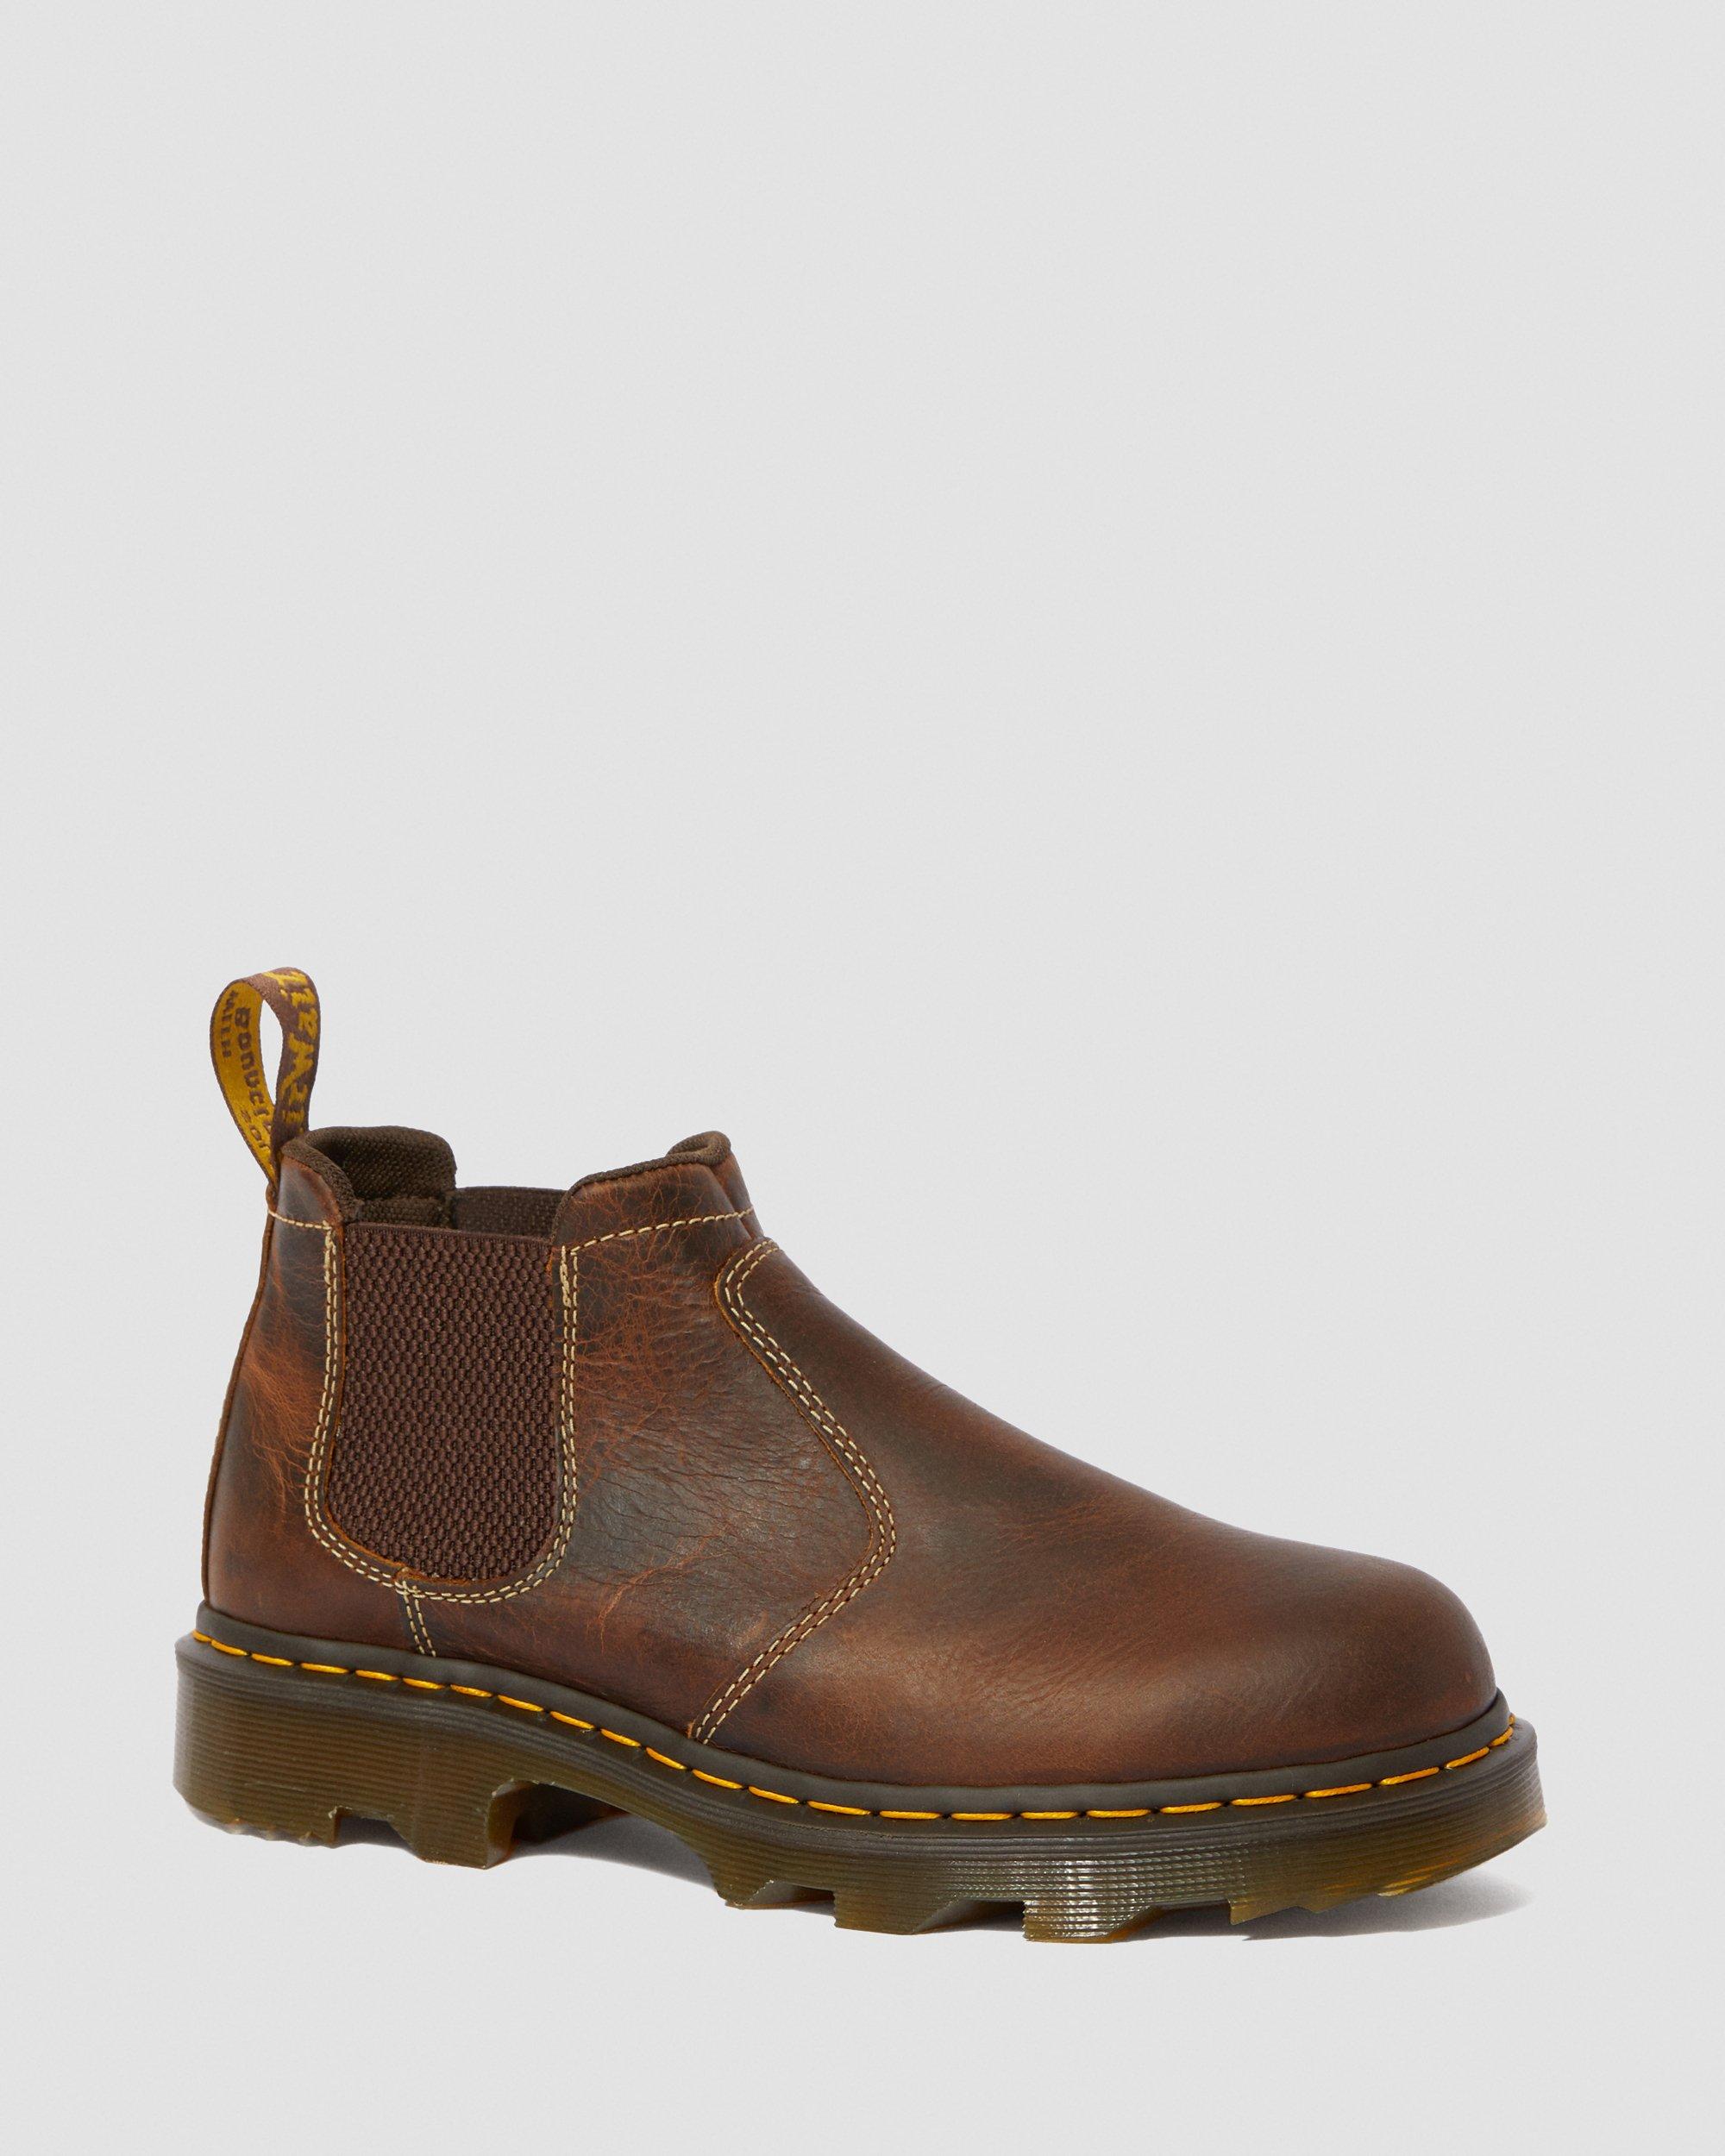 Penly Lightweight Chelsea Work Boots in Tan | Dr. Martens